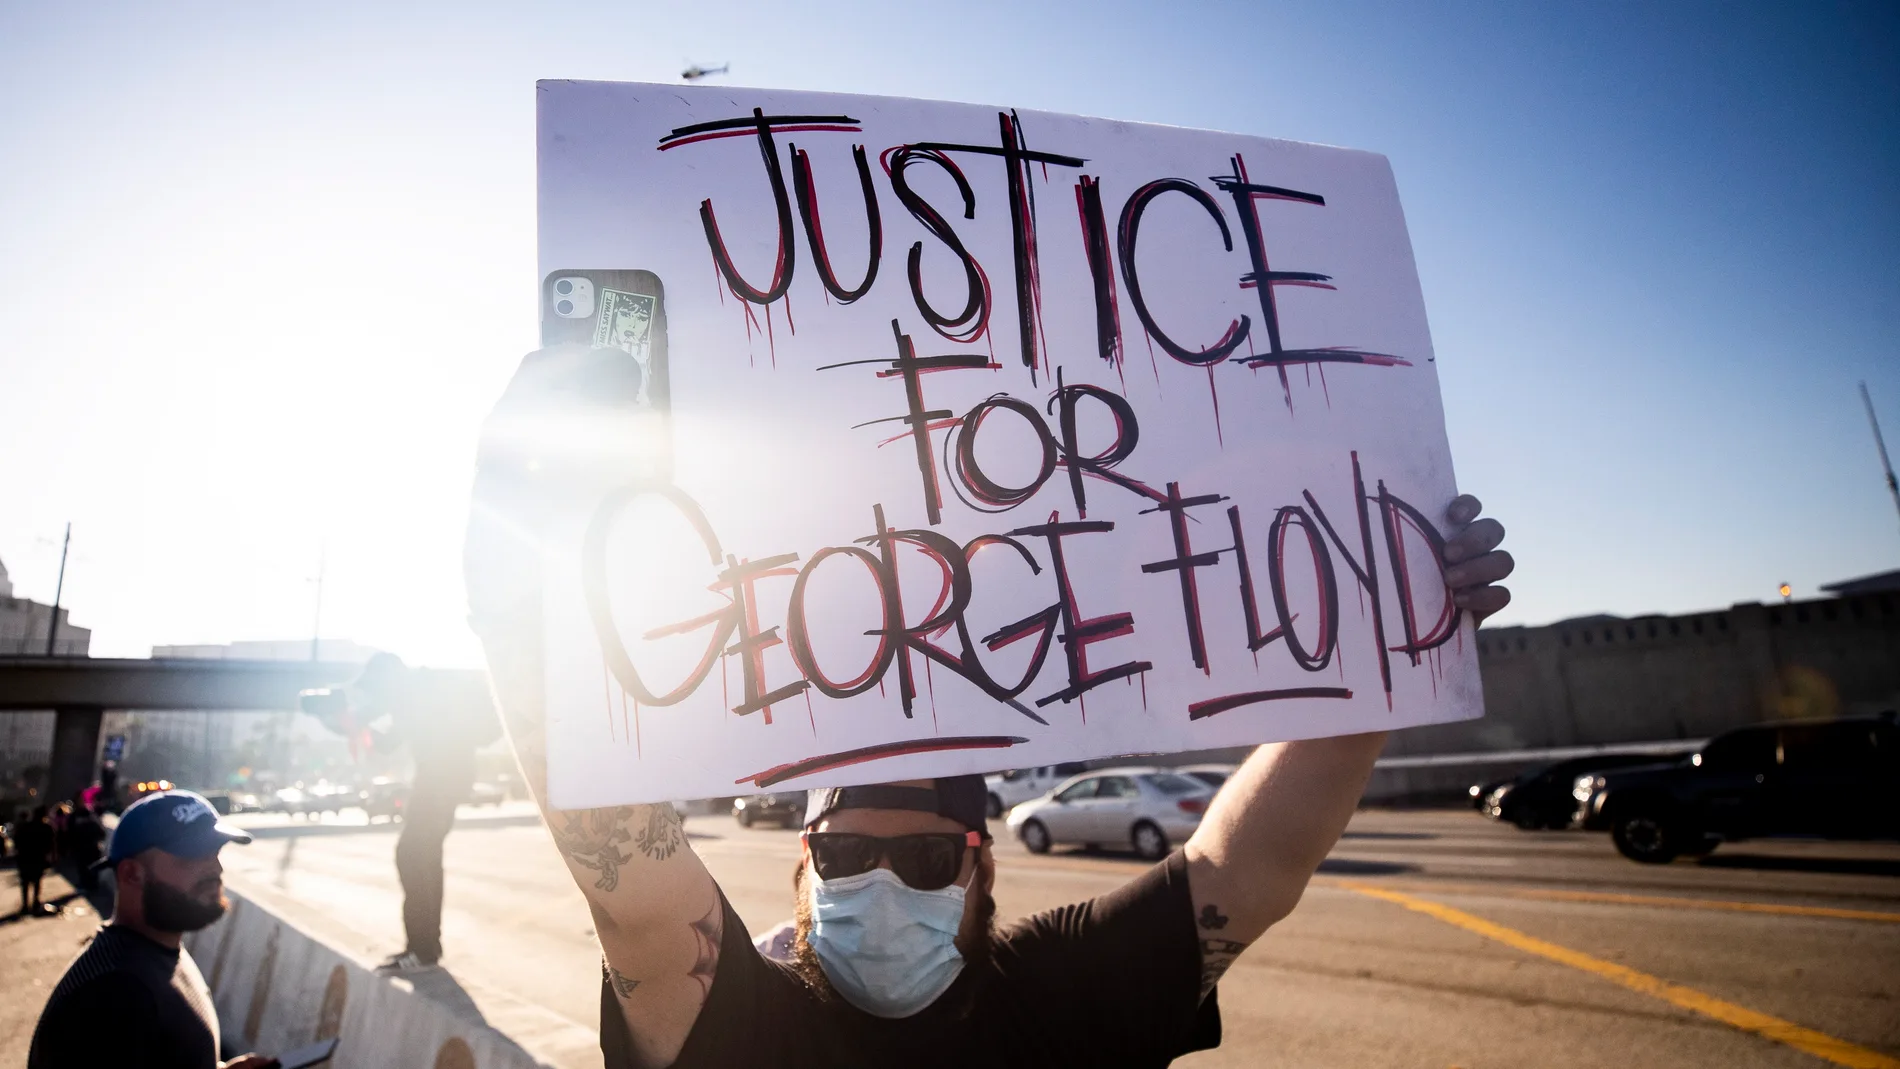 Los Angeles (United States), 28/05/2020.- People hold placards during a protest following the death of George Floyd, in Los Angeles, California, USA, 27 May 2020. A bystander's video posted online on 25 May appeared to show George Floyd, 46, pleading with arresting officers that he couldn't breathe as an officer knelt on his neck, in Minnesota. The unarmed black man later died in police custody. (Protestas, Estados Unidos) EFE/EPA/ETIENNE LAURENT